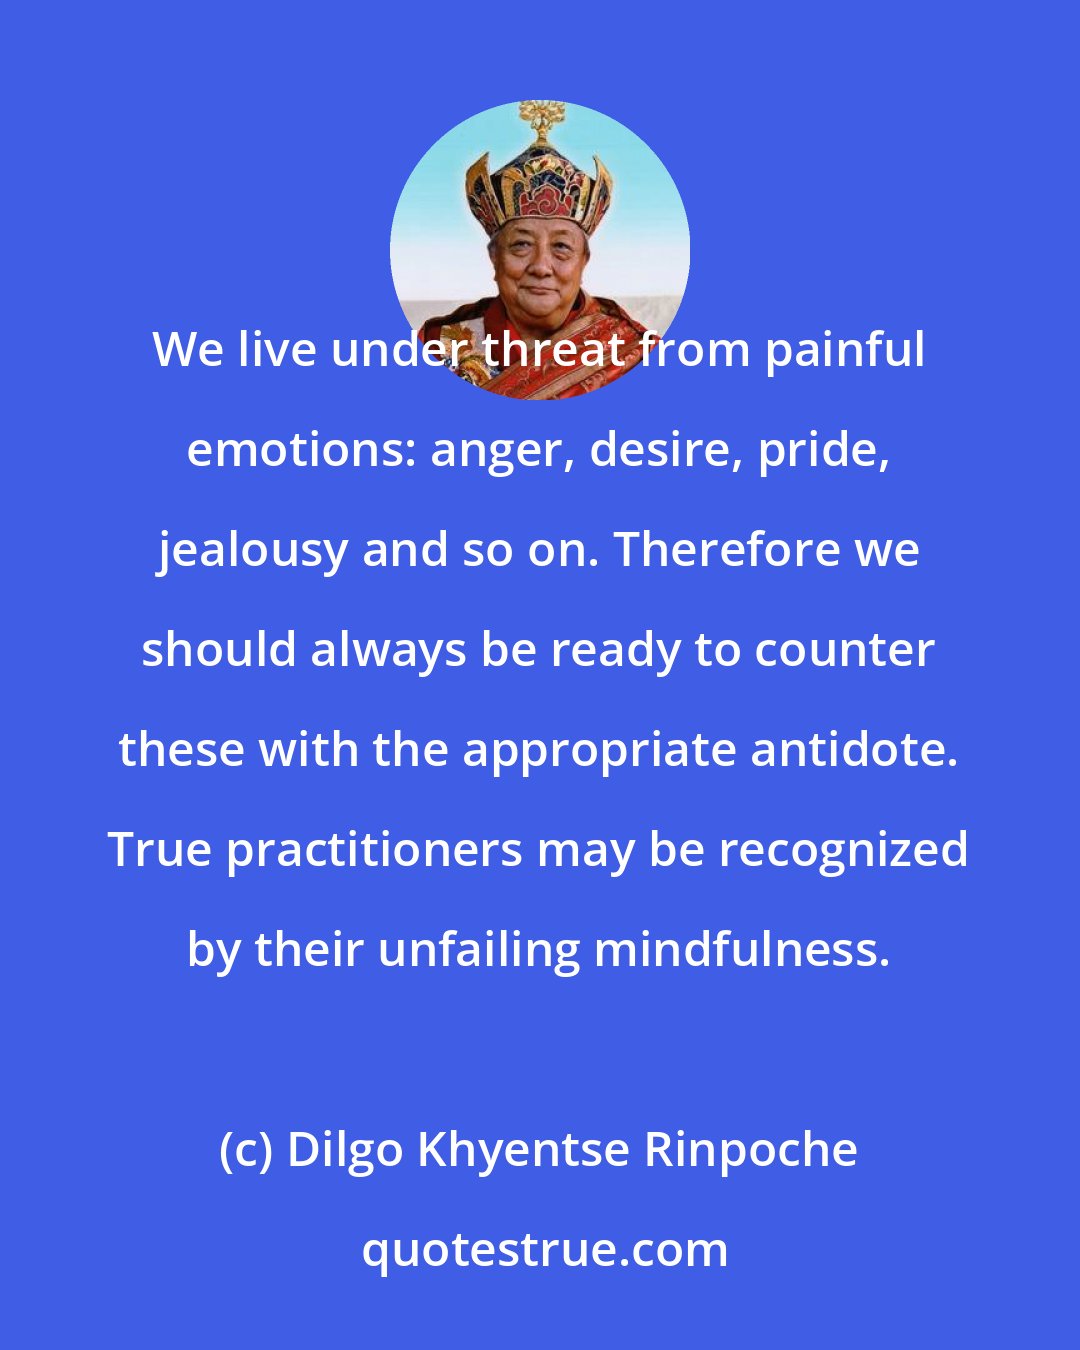 Dilgo Khyentse Rinpoche: We live under threat from painful emotions: anger, desire, pride, jealousy and so on. Therefore we should always be ready to counter these with the appropriate antidote. True practitioners may be recognized by their unfailing mindfulness.